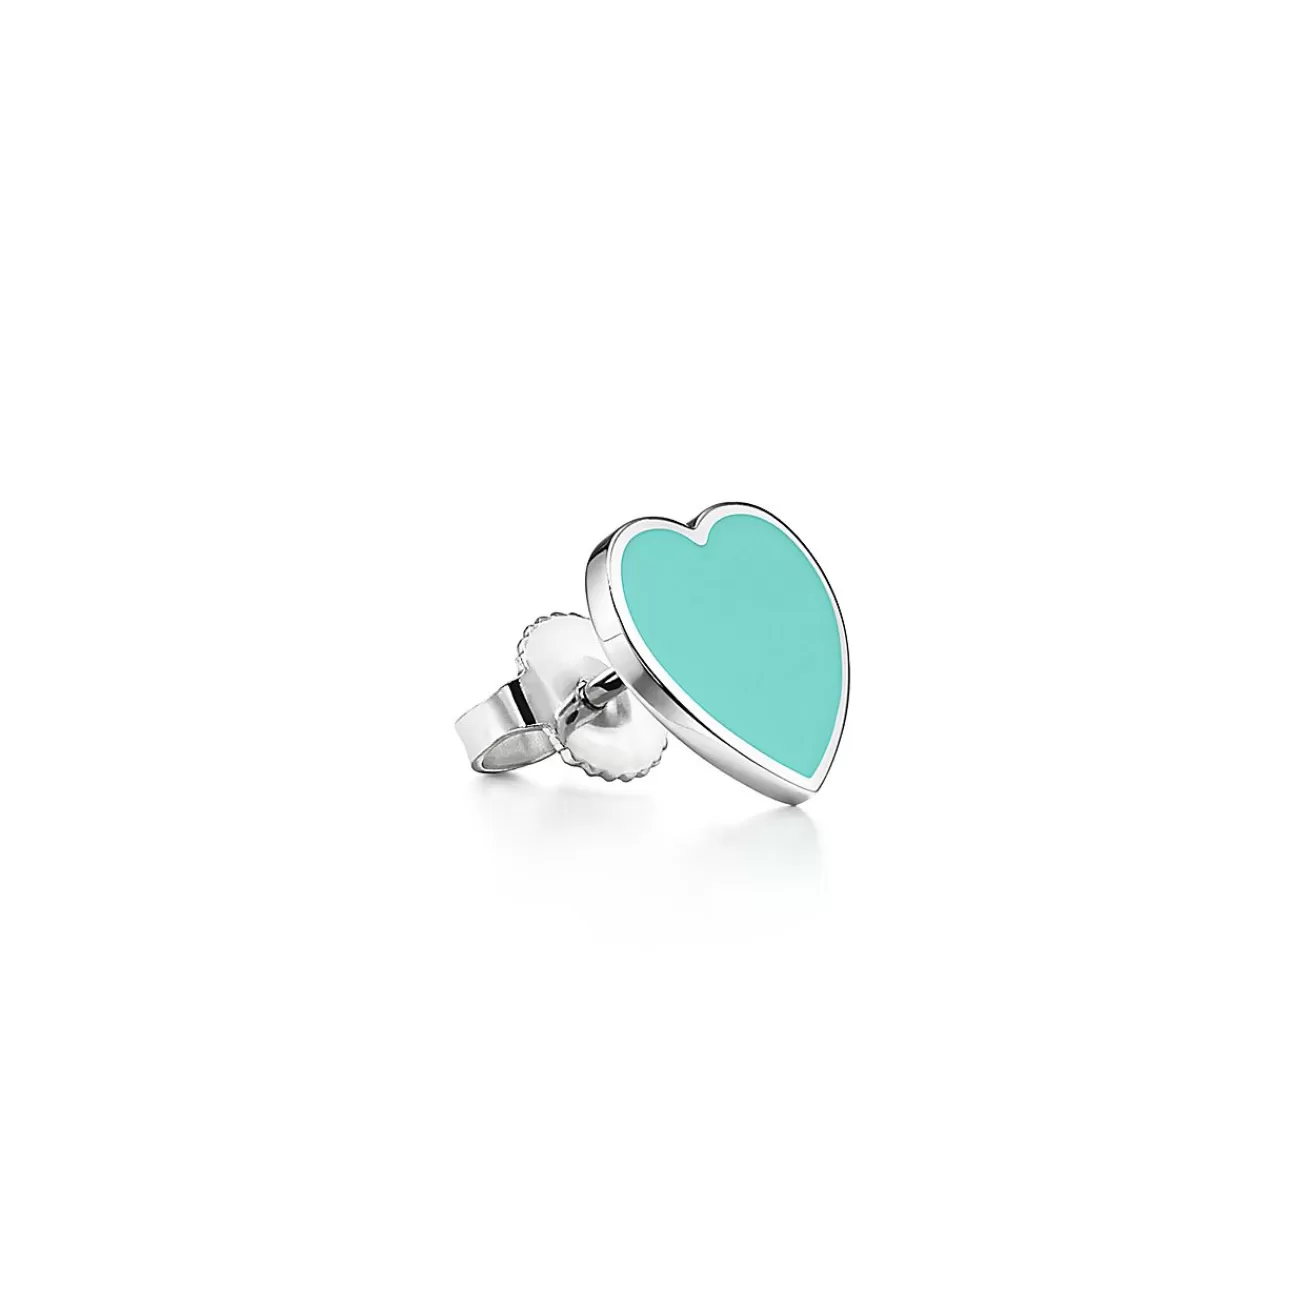 Tiffany & Co. Return to Tiffany® Earrings in Silver with Tiffany Blue® and a Diamond, Mini | ^ Earrings | Gifts for Her